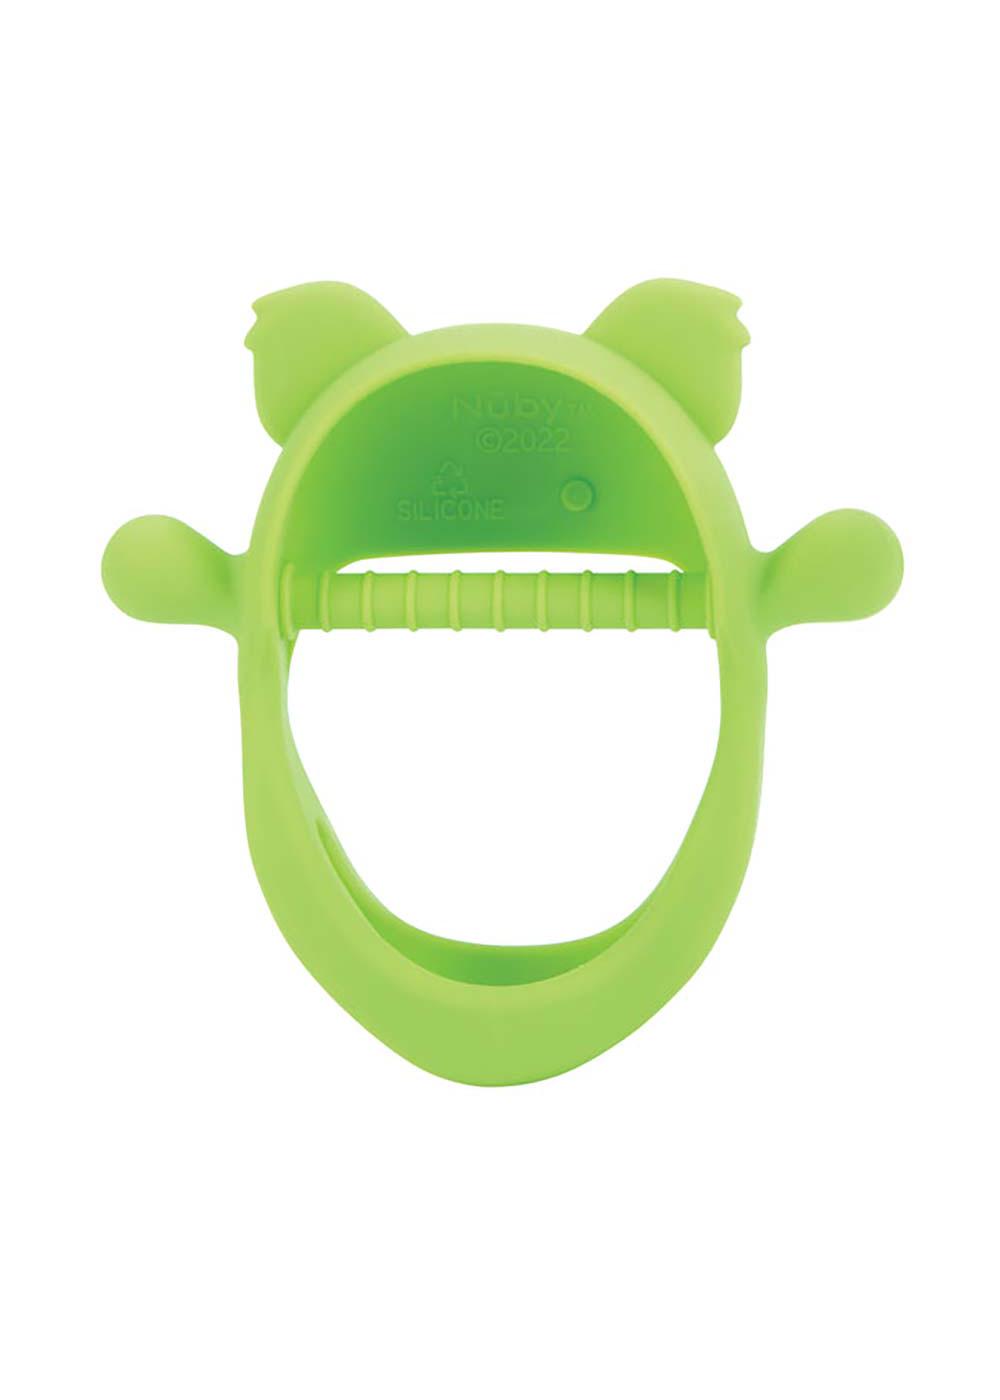 Nuby Silicone Teething Mitten; image 2 of 3